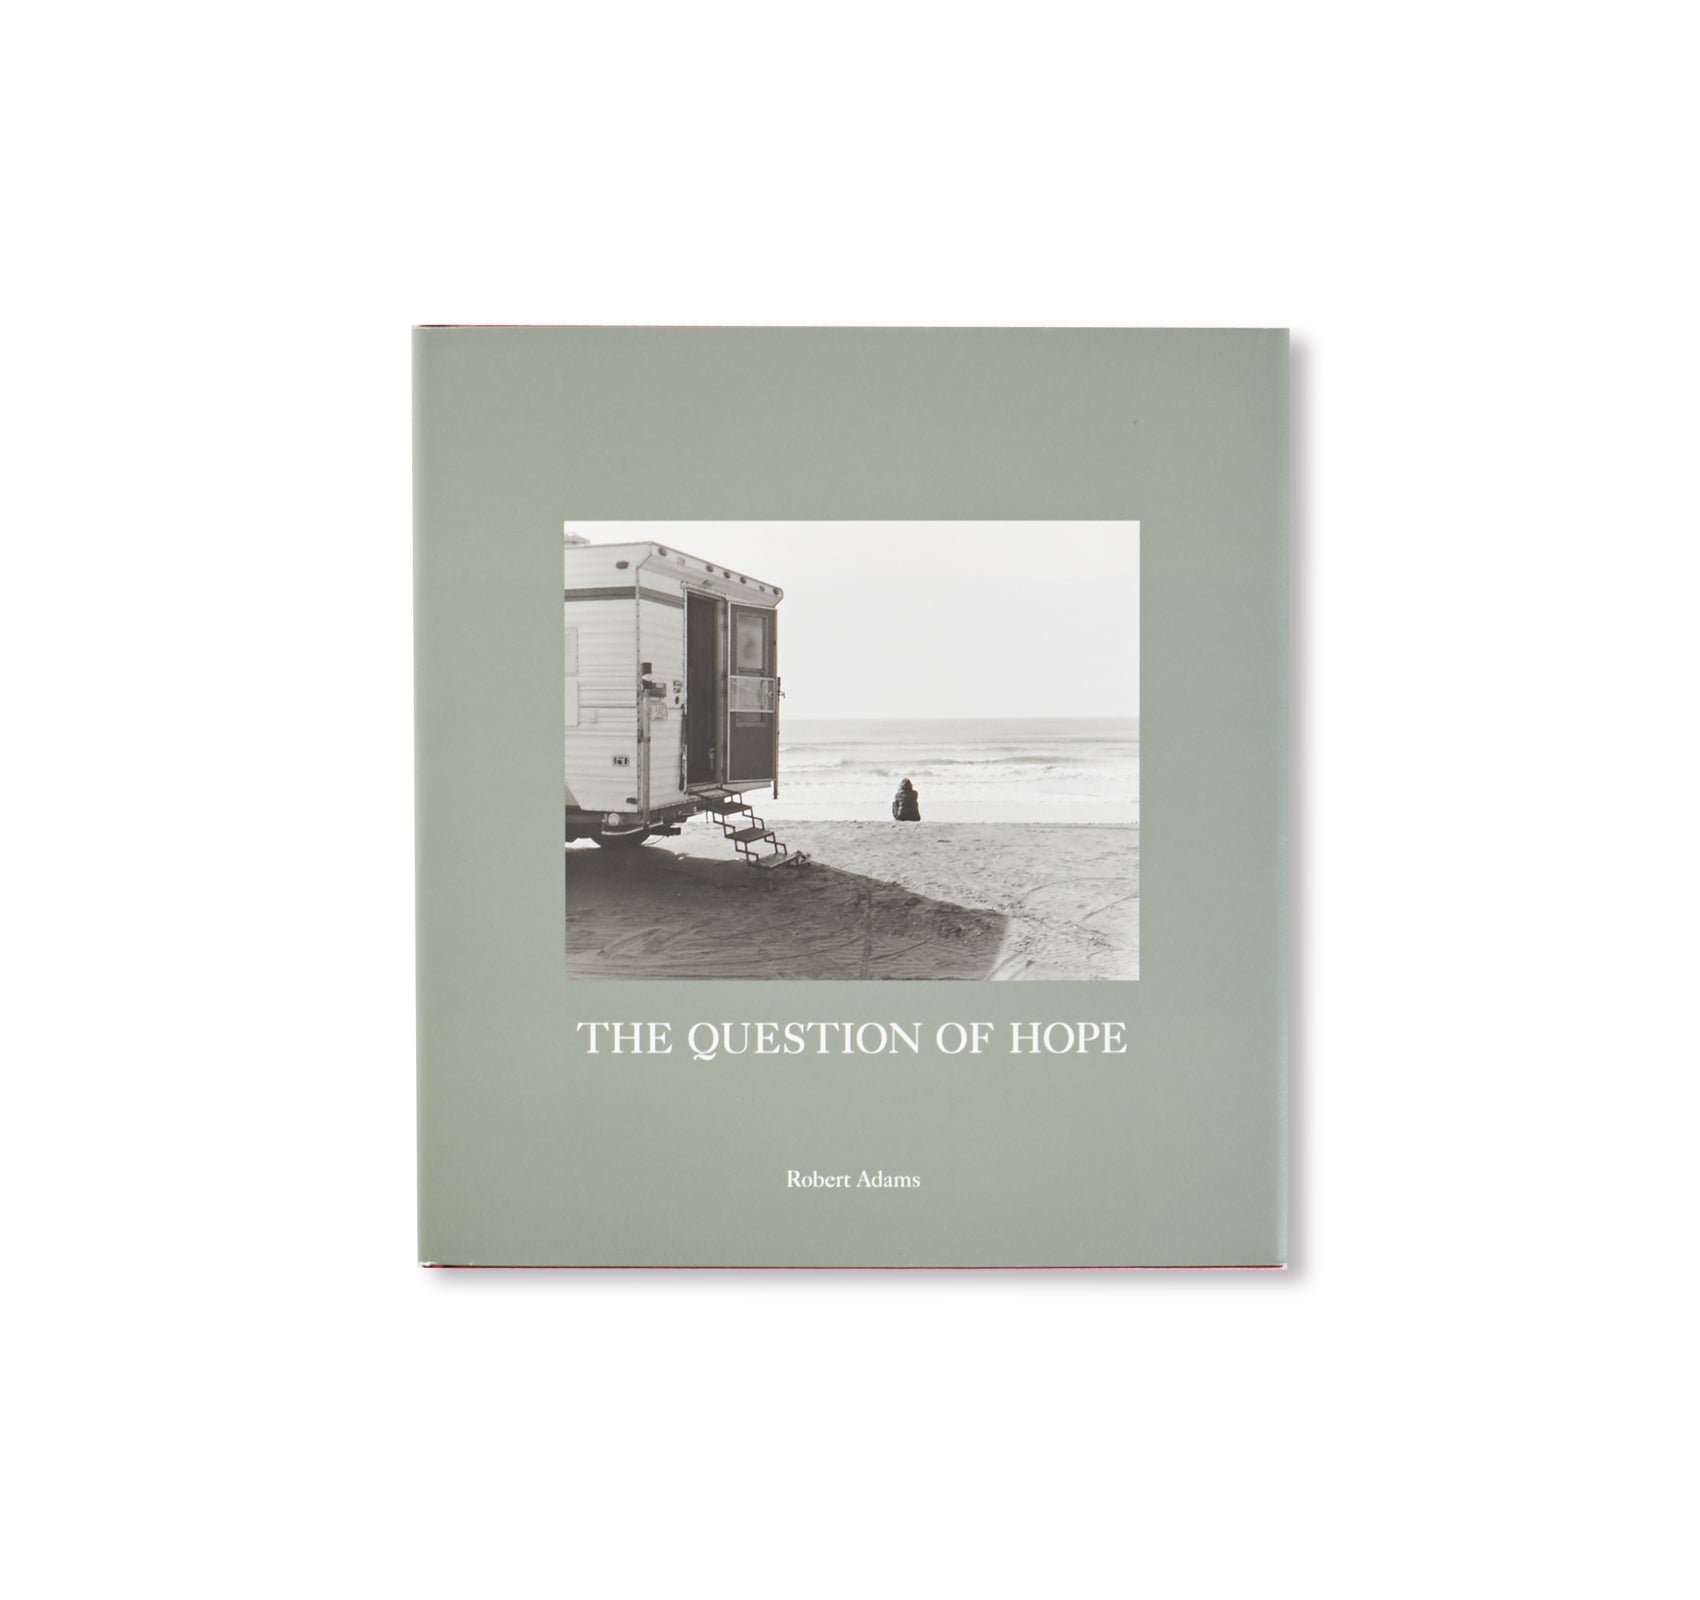 THE QUESTION OF HOPE by Robert Adams